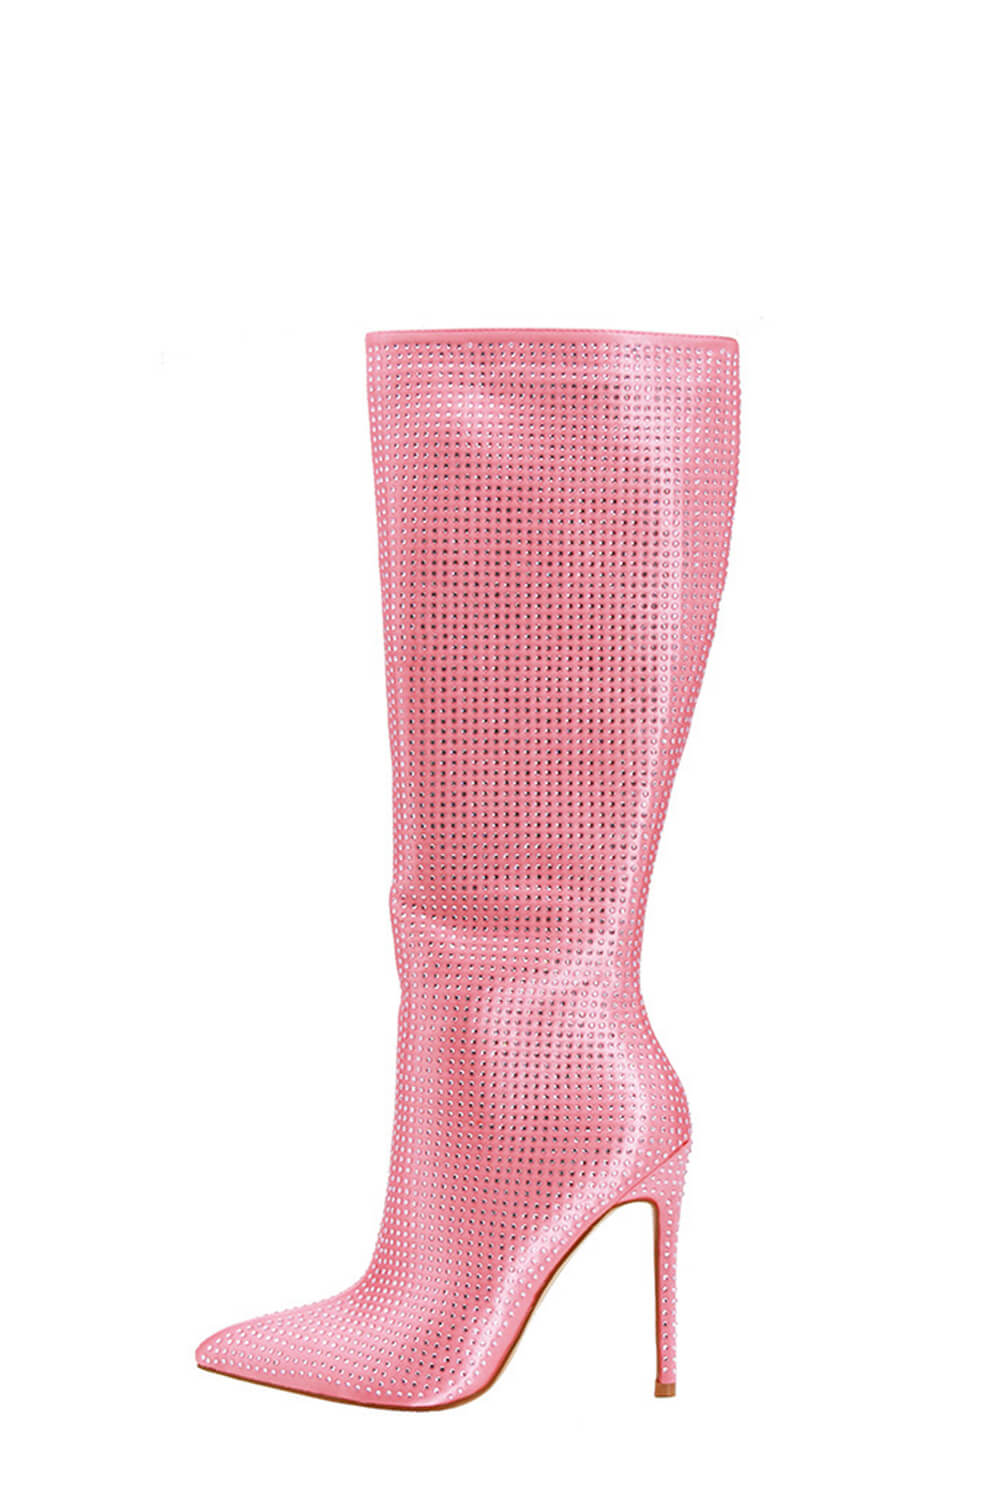 Glitter Knee High Pointed Toe Stiletto Heeled Boots - Pink